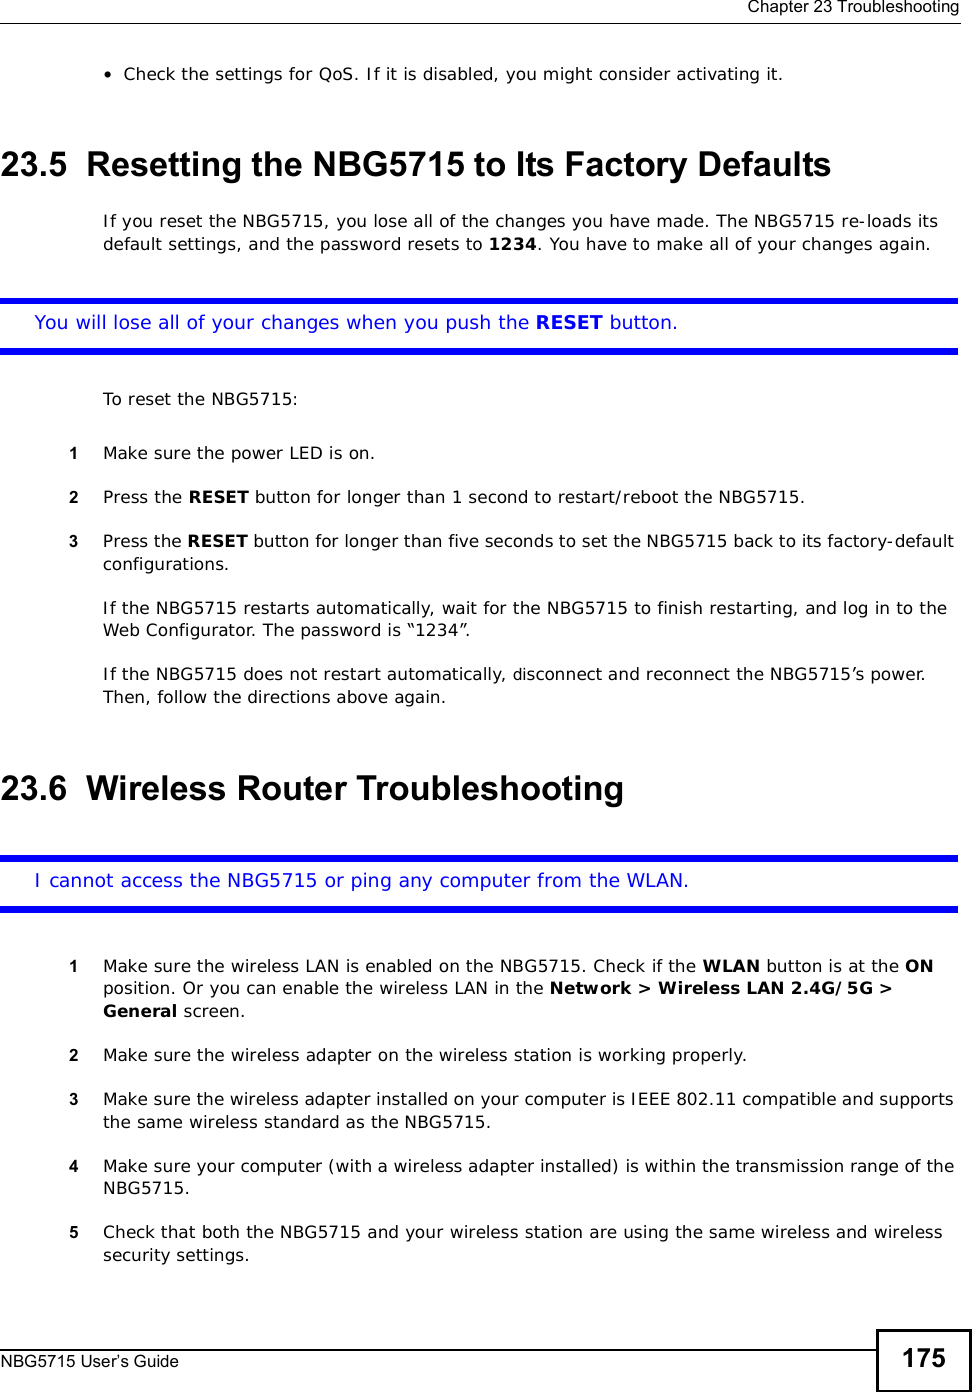  Chapter 23TroubleshootingNBG5715 User’s Guide 175•Check the settings for QoS. If it is disabled, you might consider activating it.23.5  Resetting the NBG5715 to Its Factory Defaults If you reset the NBG5715, you lose all of the changes you have made. The NBG5715 re-loads its default settings, and the password resets to 1234. You have to make all of your changes again.You will lose all of your changes when you push the RESET button.To reset the NBG5715:1Make sure the power LED is on.2Press the RESET button for longer than 1 second to restart/reboot the NBG5715.3Press the RESET button for longer than five seconds to set the NBG5715 back to its factory-default configurations.If the NBG5715 restarts automatically, wait for the NBG5715 to finish restarting, and log in to the Web Configurator. The password is “1234”.If the NBG5715 does not restart automatically, disconnect and reconnect the NBG5715’s power. Then, follow the directions above again.23.6  Wireless Router TroubleshootingI cannot access the NBG5715 or ping any computer from the WLAN.1Make sure the wireless LAN is enabled on the NBG5715. Check if the WLAN button is at the ONposition. Or you can enable the wireless LAN in the Network &gt; Wireless LAN 2.4G/5G &gt; General screen.2Make sure the wireless adapter on the wireless station is working properly.3Make sure the wireless adapter installed on your computer is IEEE 802.11 compatible and supports the same wireless standard as the NBG5715.4Make sure your computer (with a wireless adapter installed) is within the transmission range of the NBG5715.5Check that both the NBG5715 and your wireless station are using the same wireless and wireless security settings.